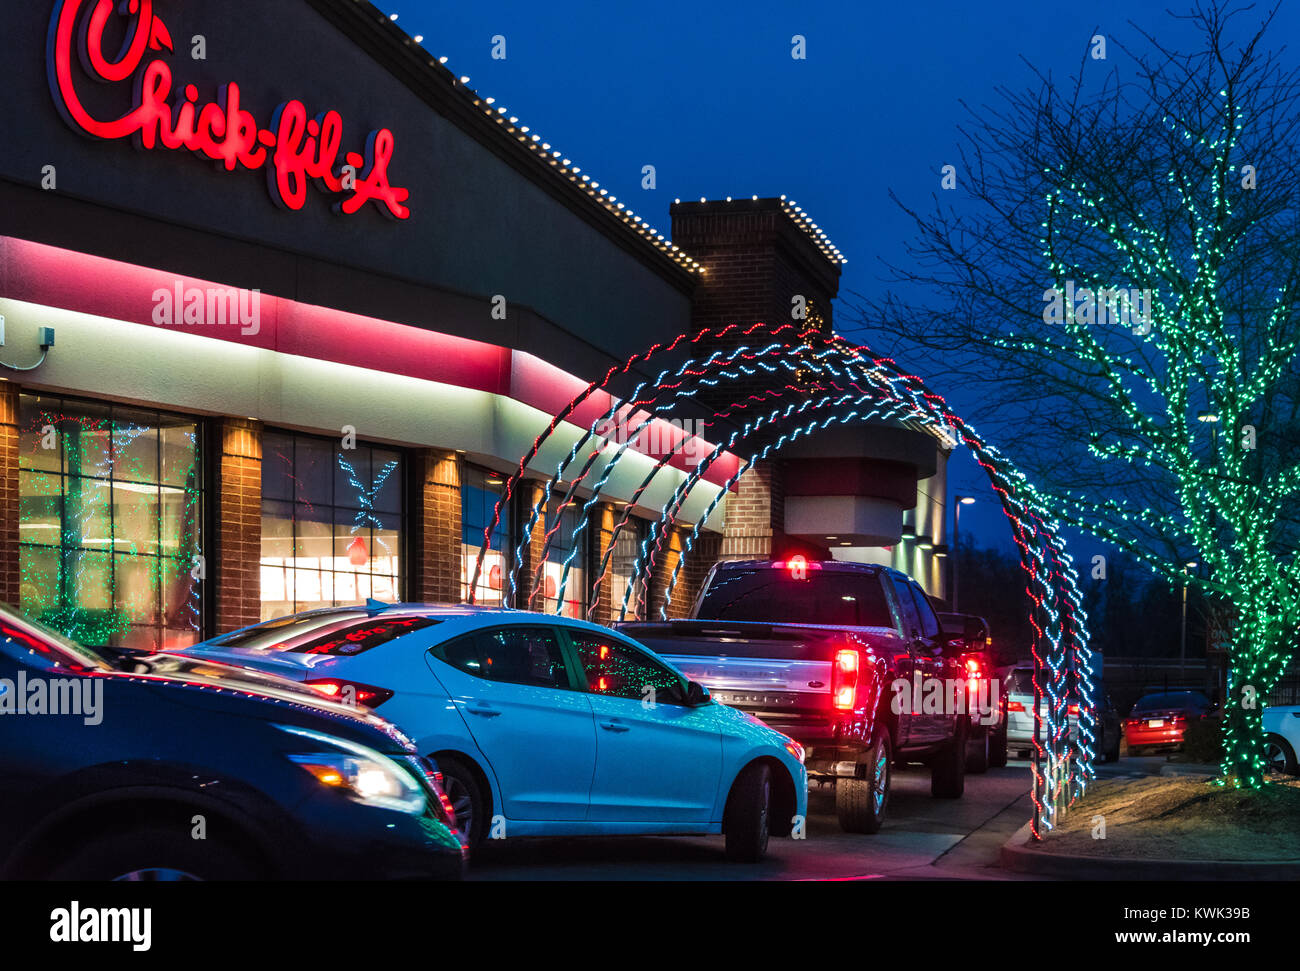 Christmas lights adorn a popular Chick-fil-A restaurant in Olive Branch, Mississippi. (USA) Stock Photo